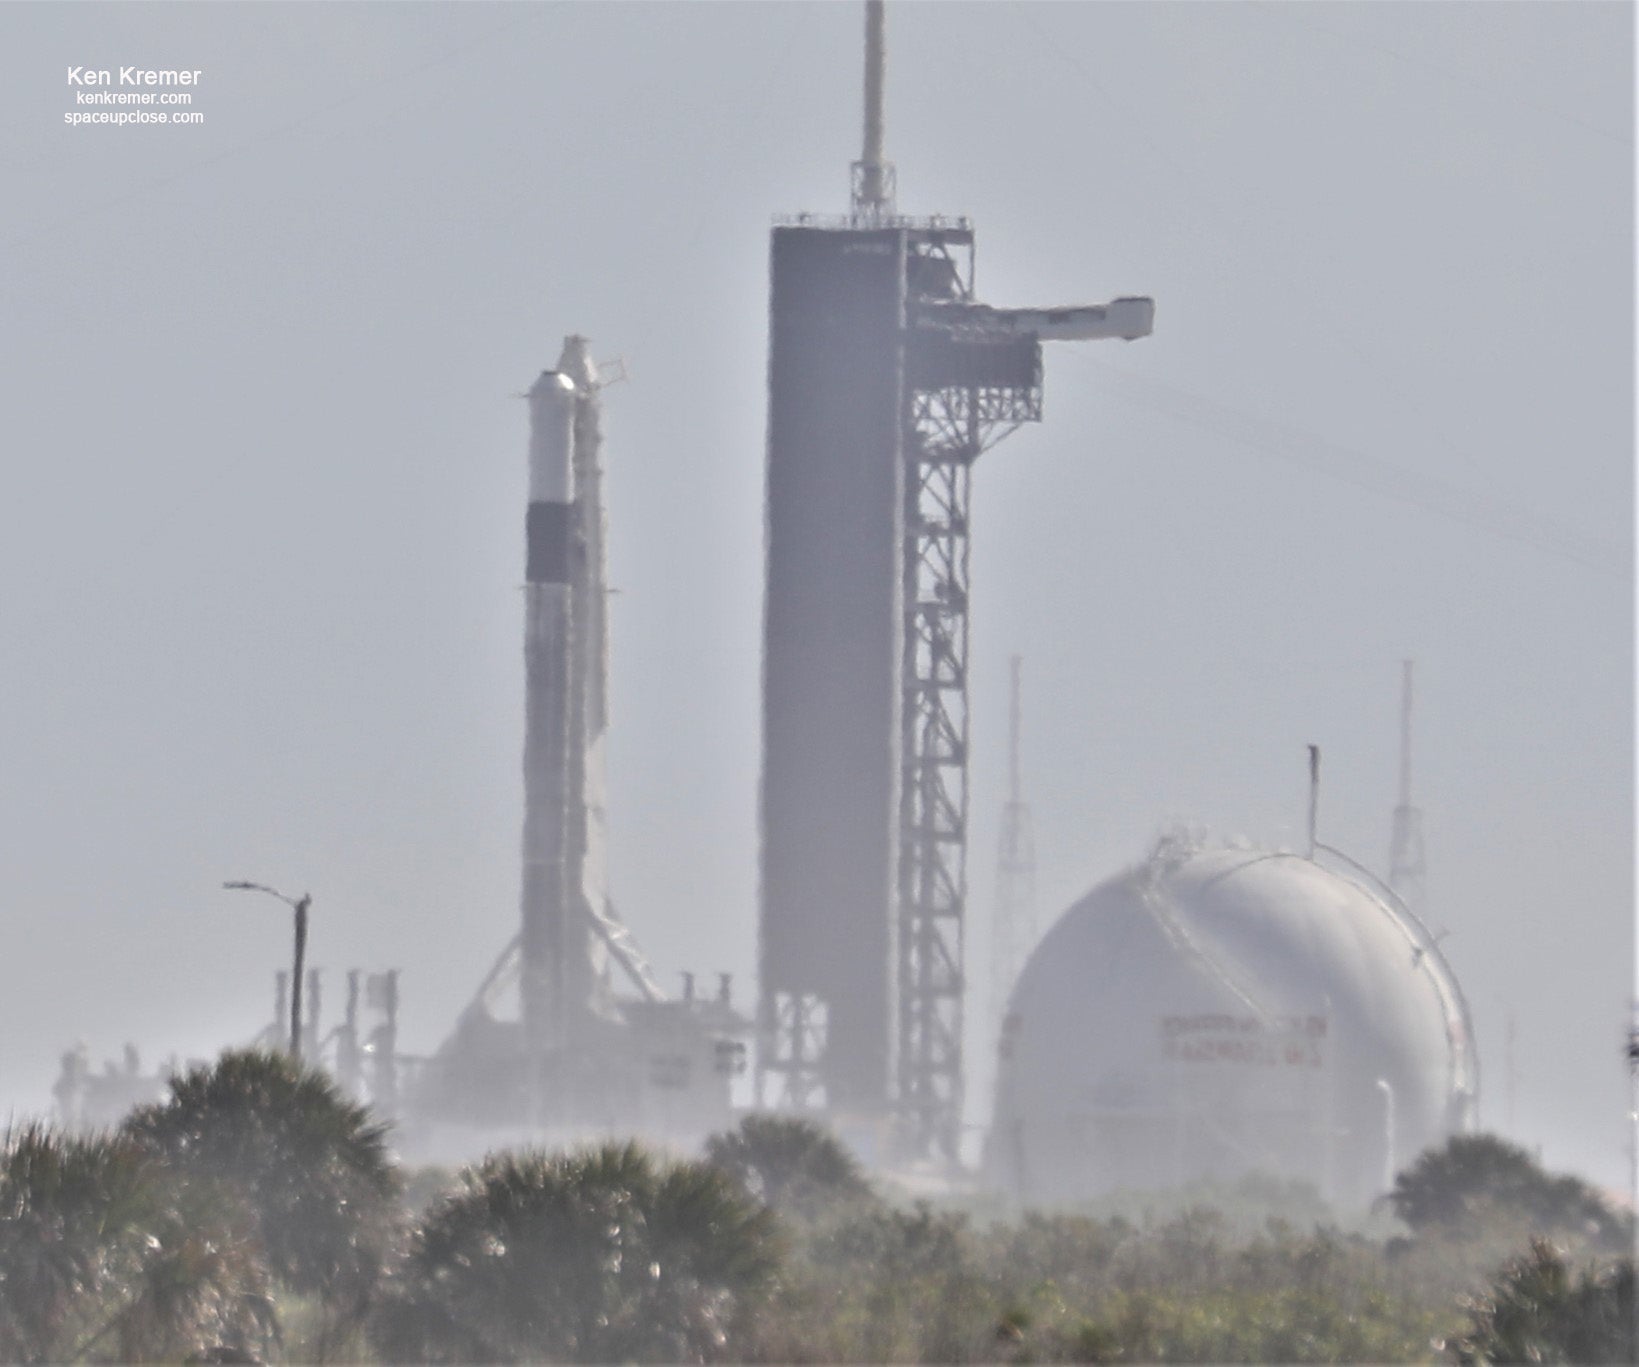 SpaceX prepares a Falcon 9 rocket for static-firing ahead of Crew Dragon's crucial test